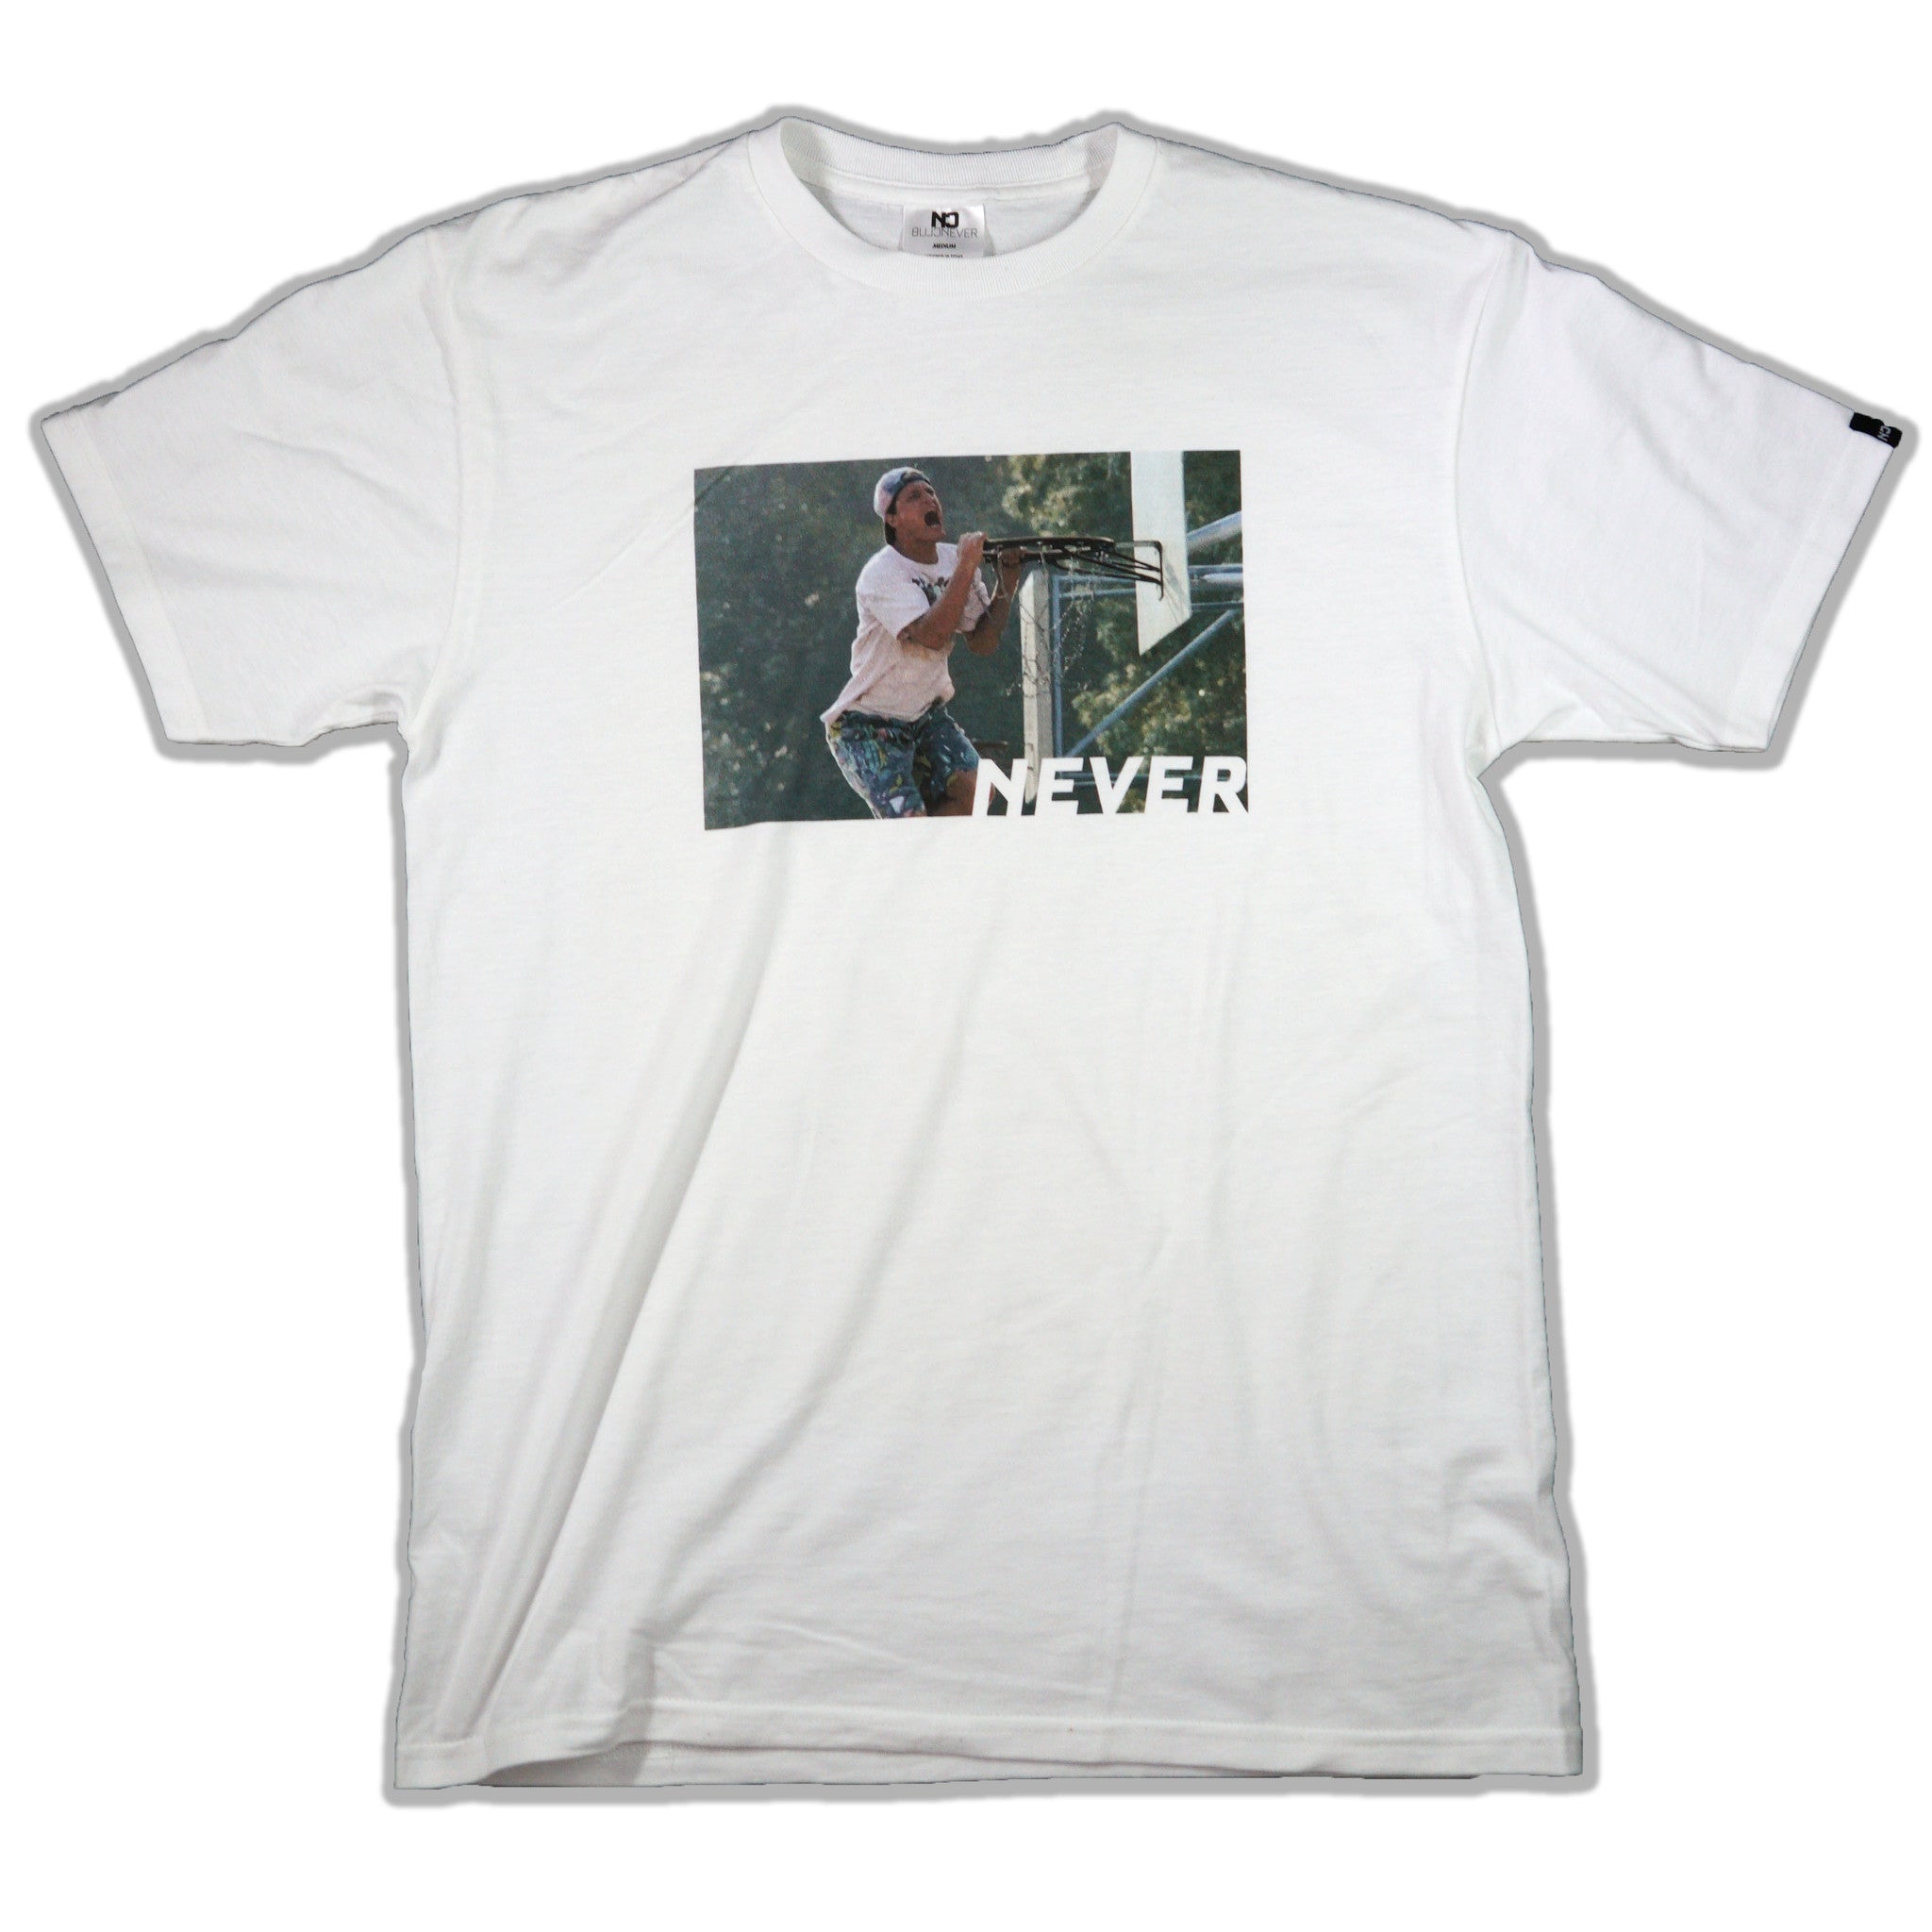 Never Can't Jump Tee - White